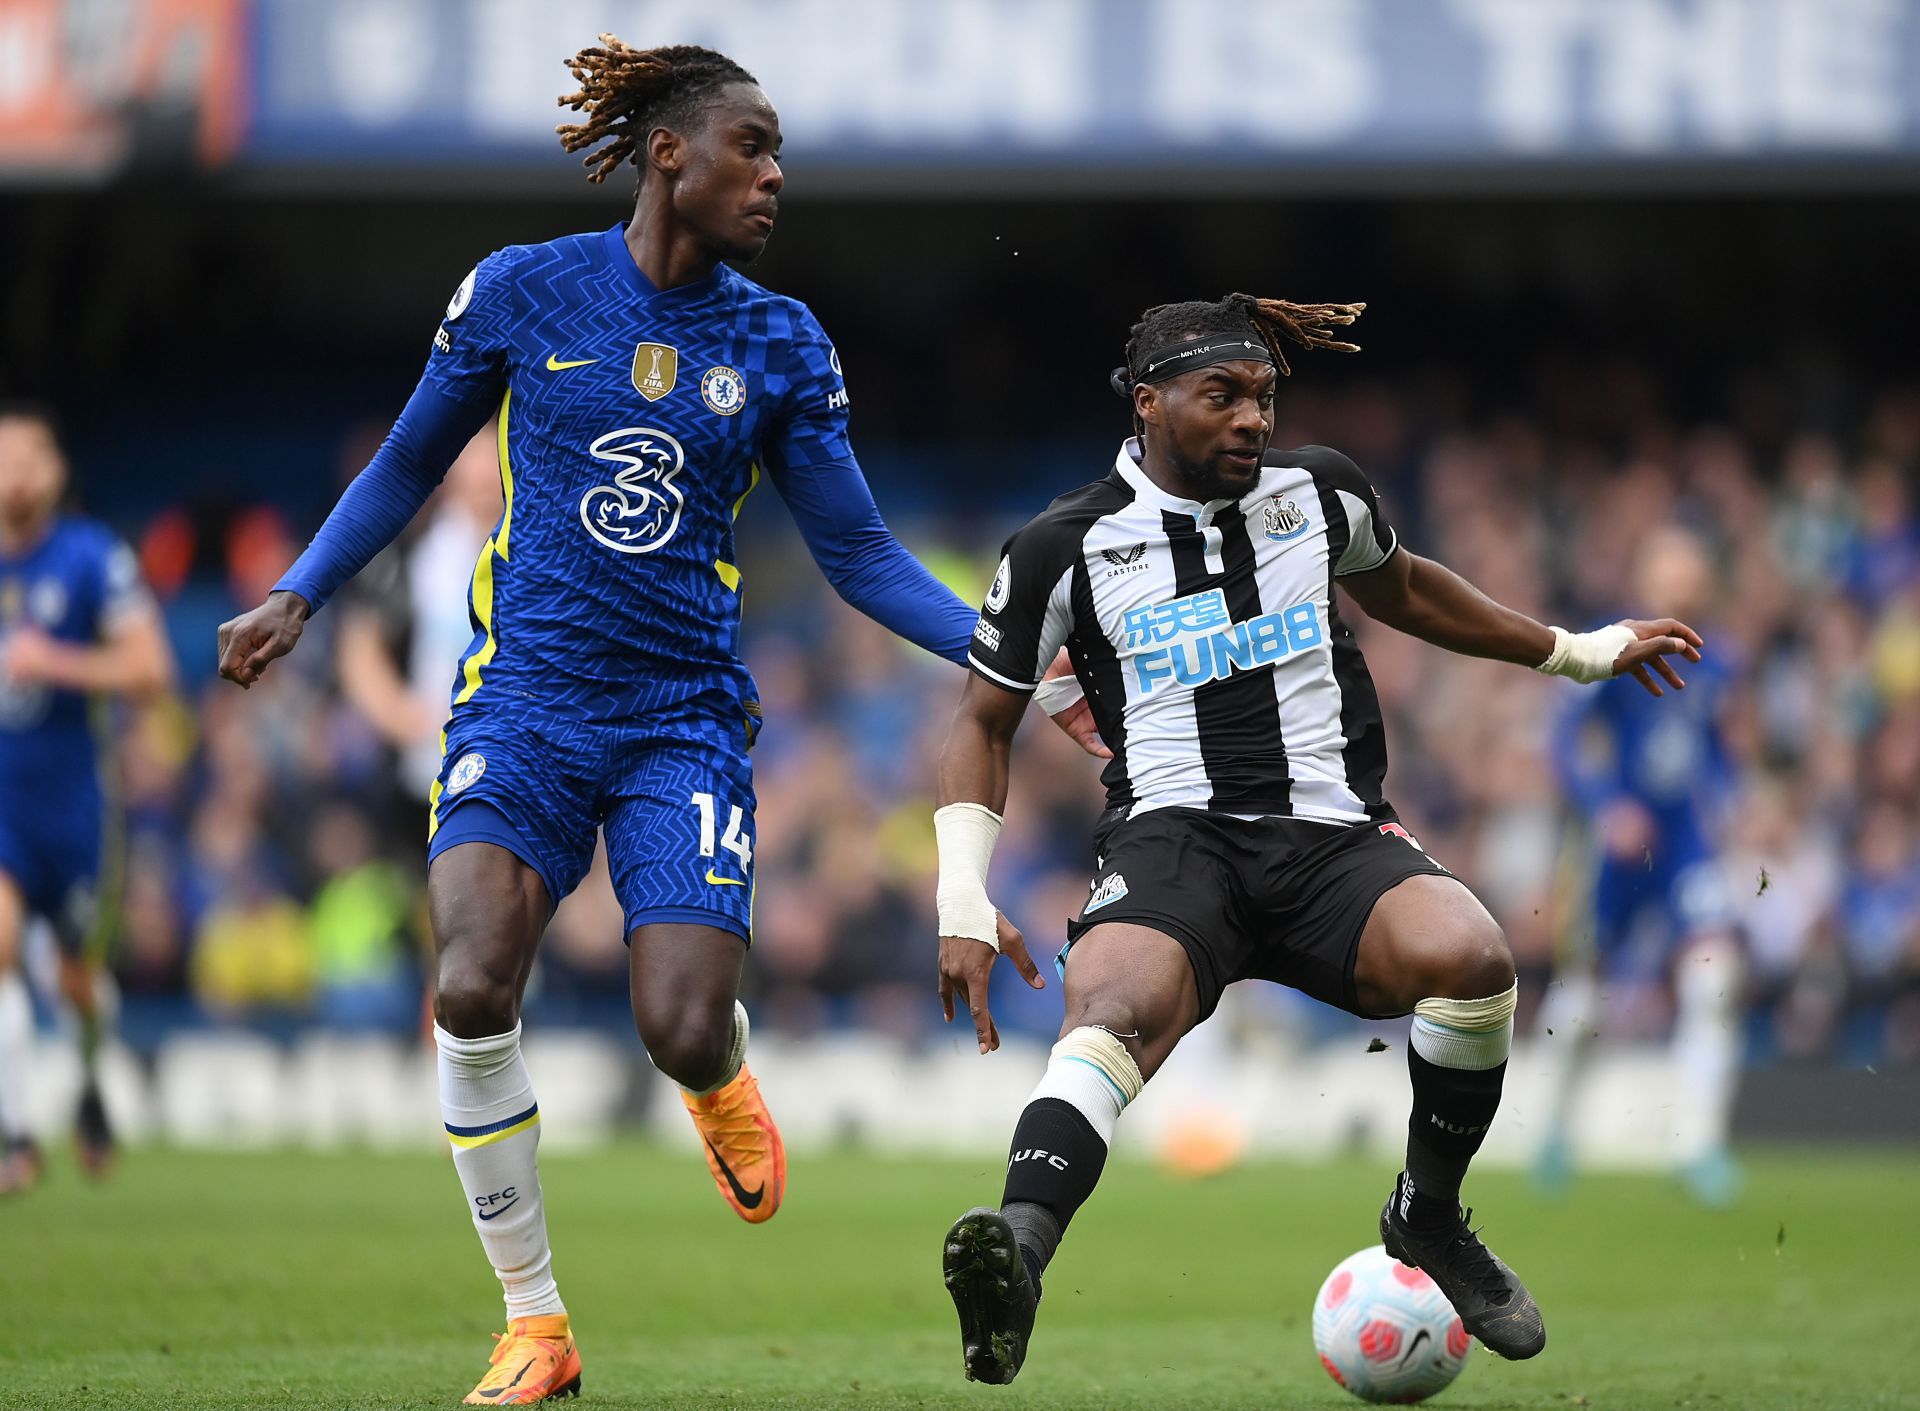 Trevoh Chalobah in action against Newcastle United